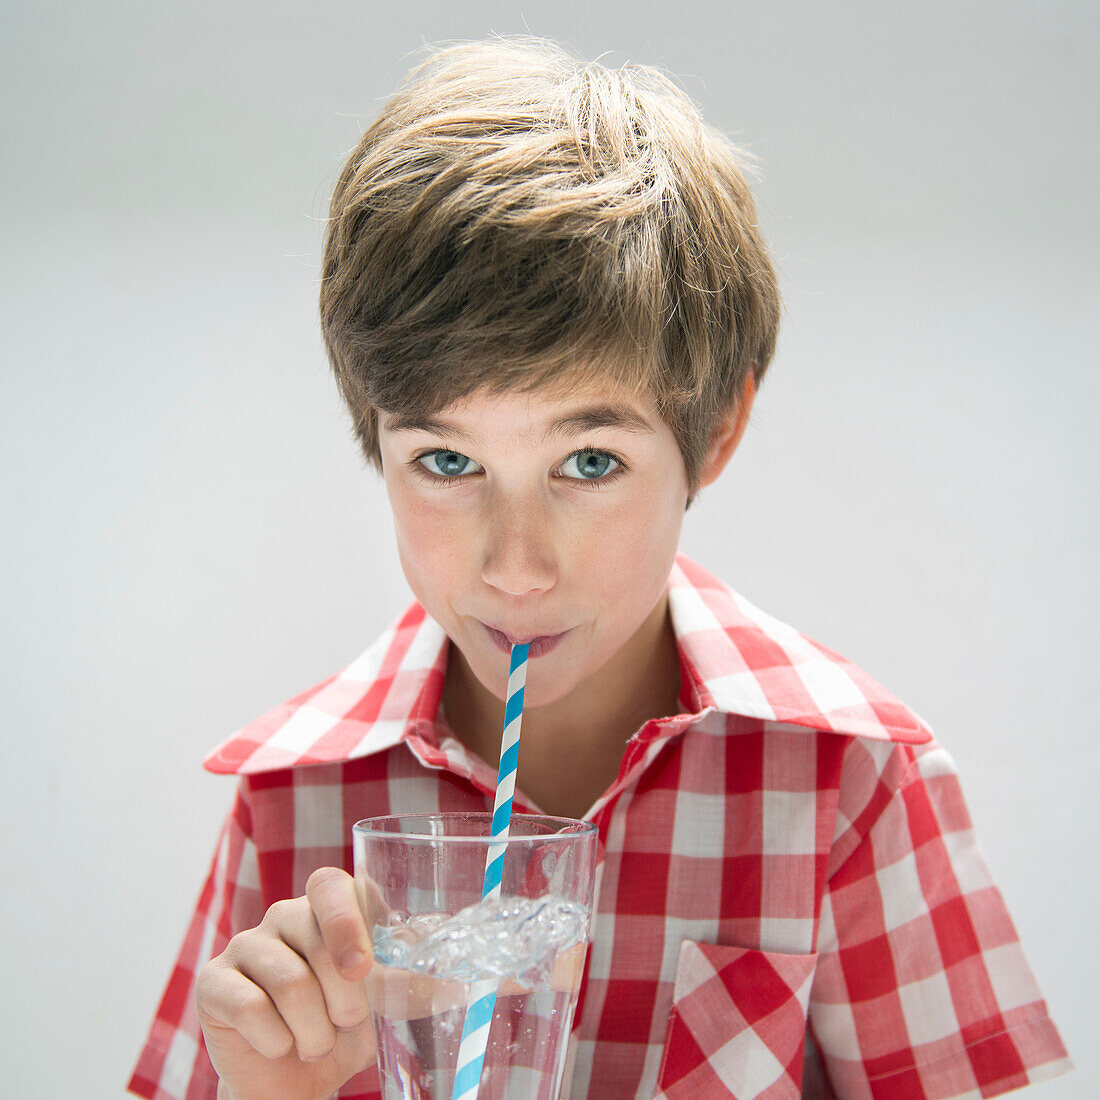 Boy drinking water with straw